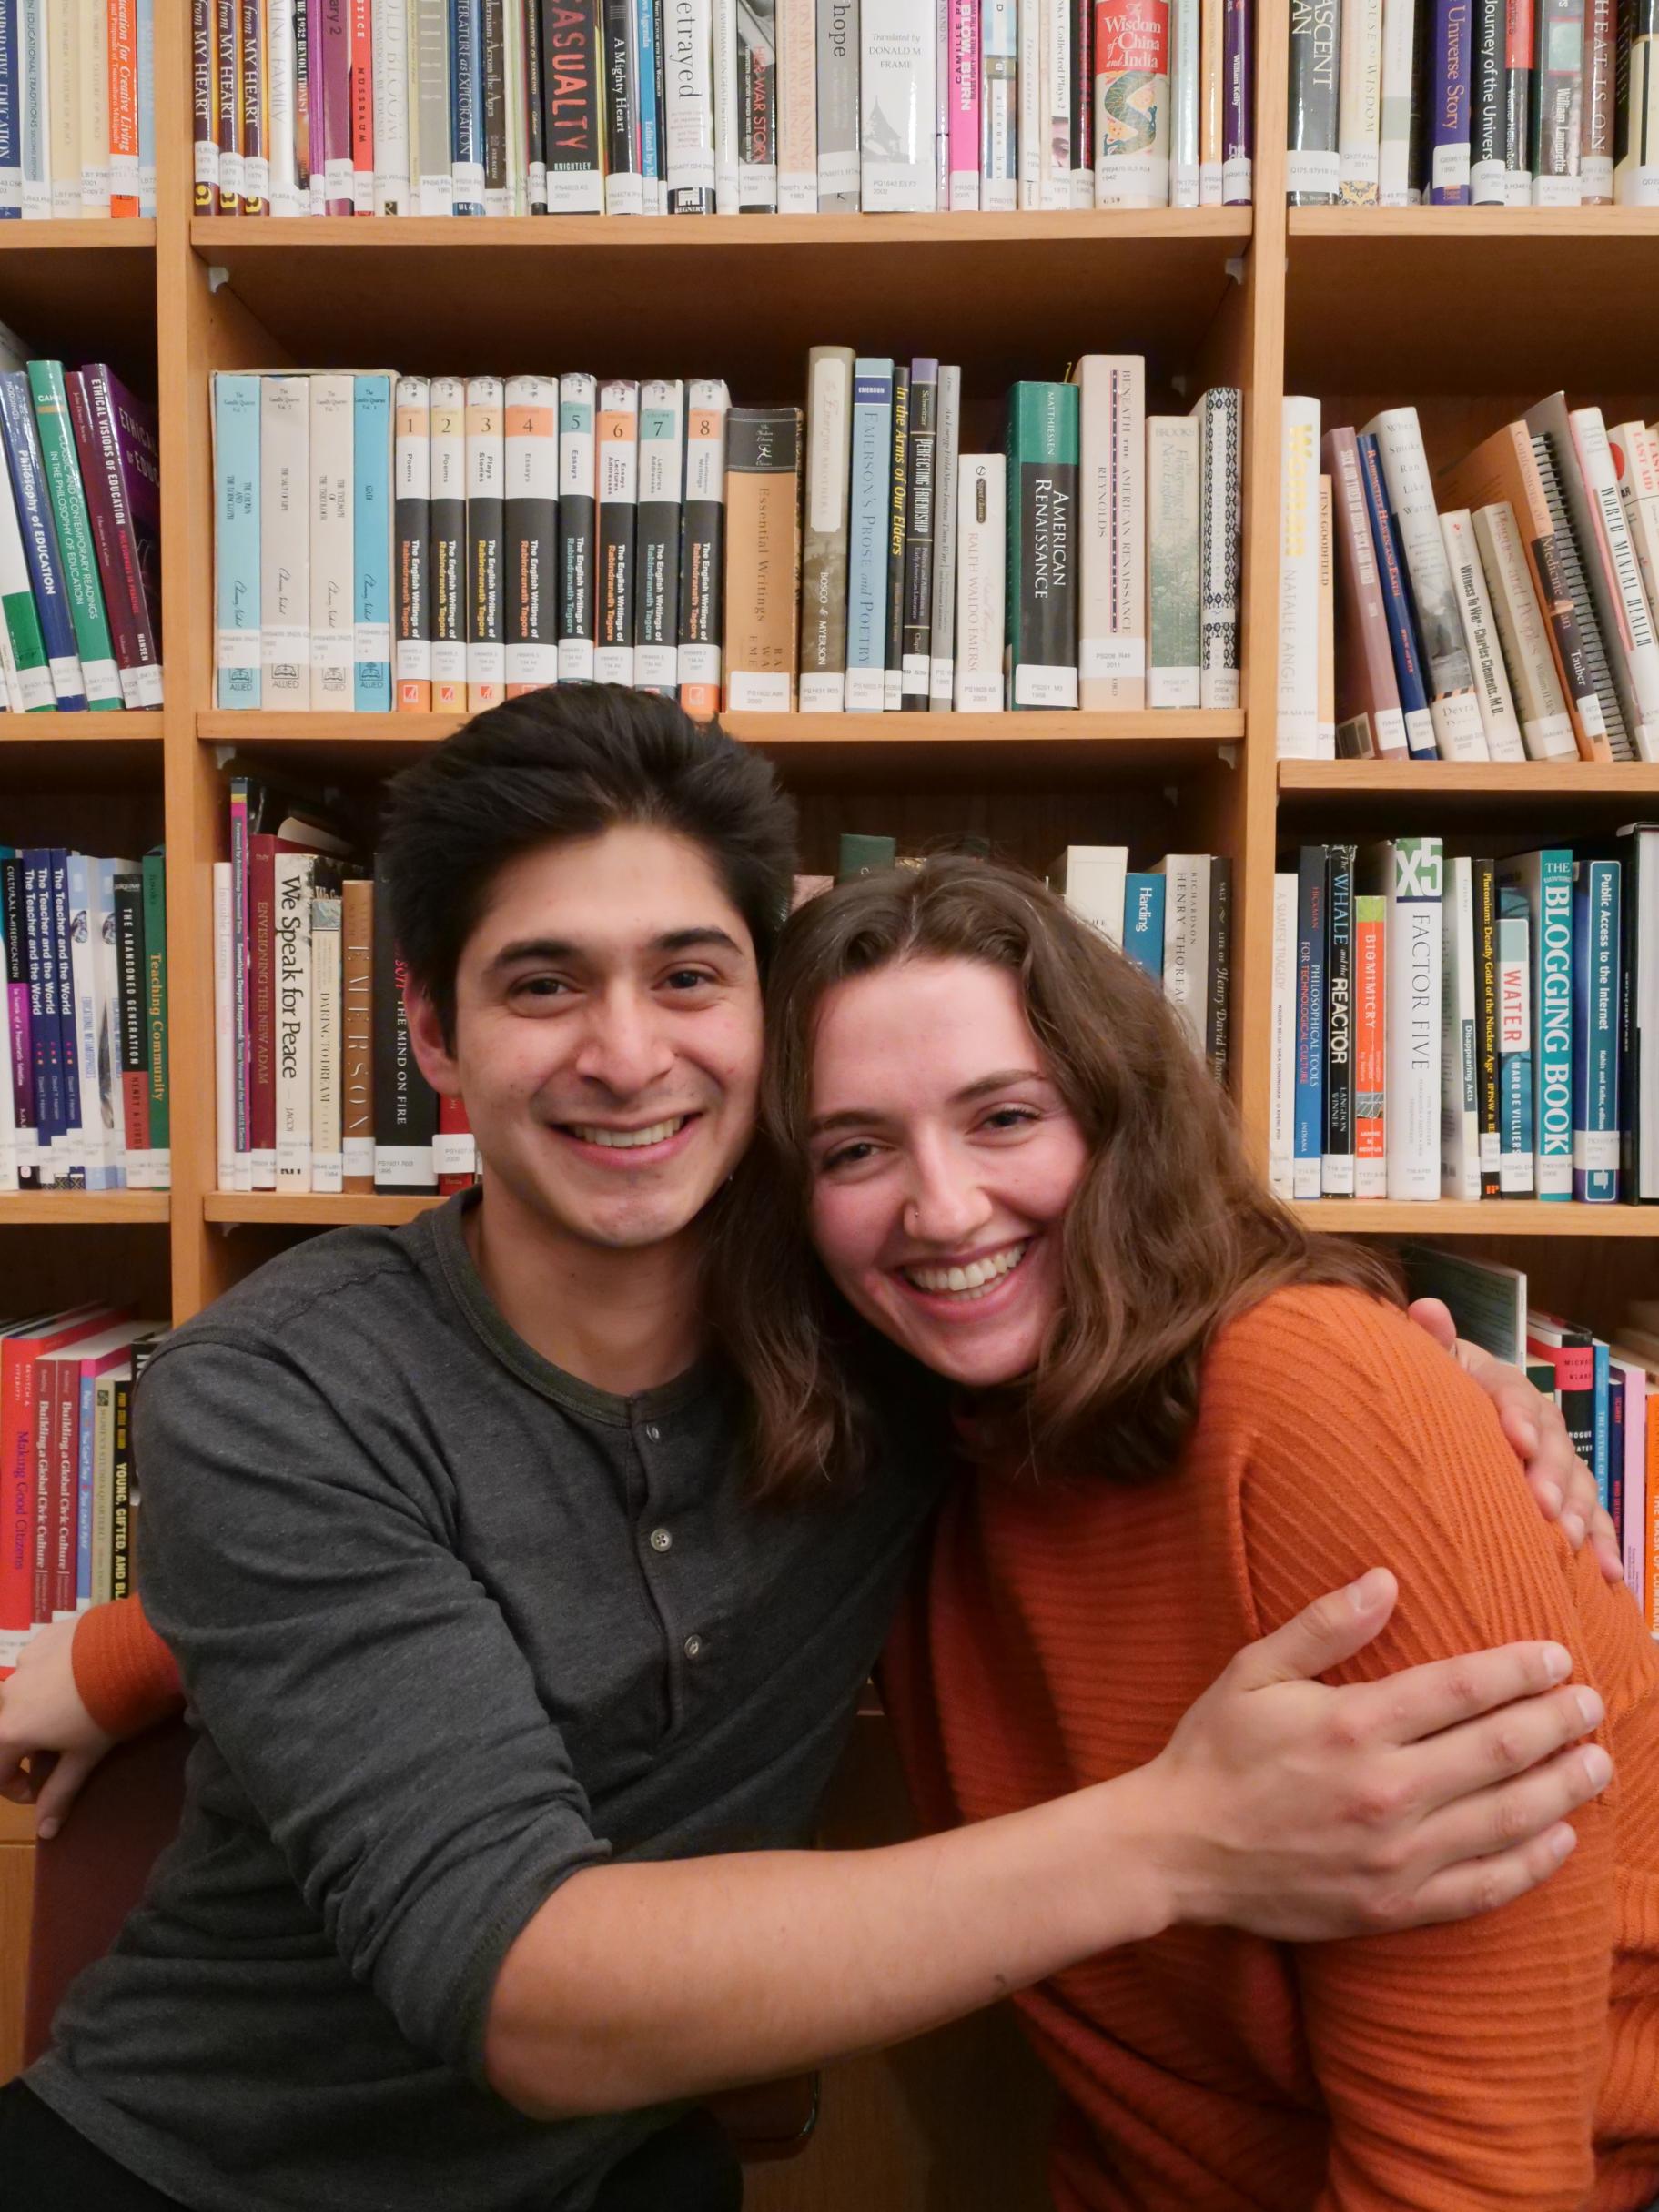 Former ICYC members Leandro Molina and Julie Olesky